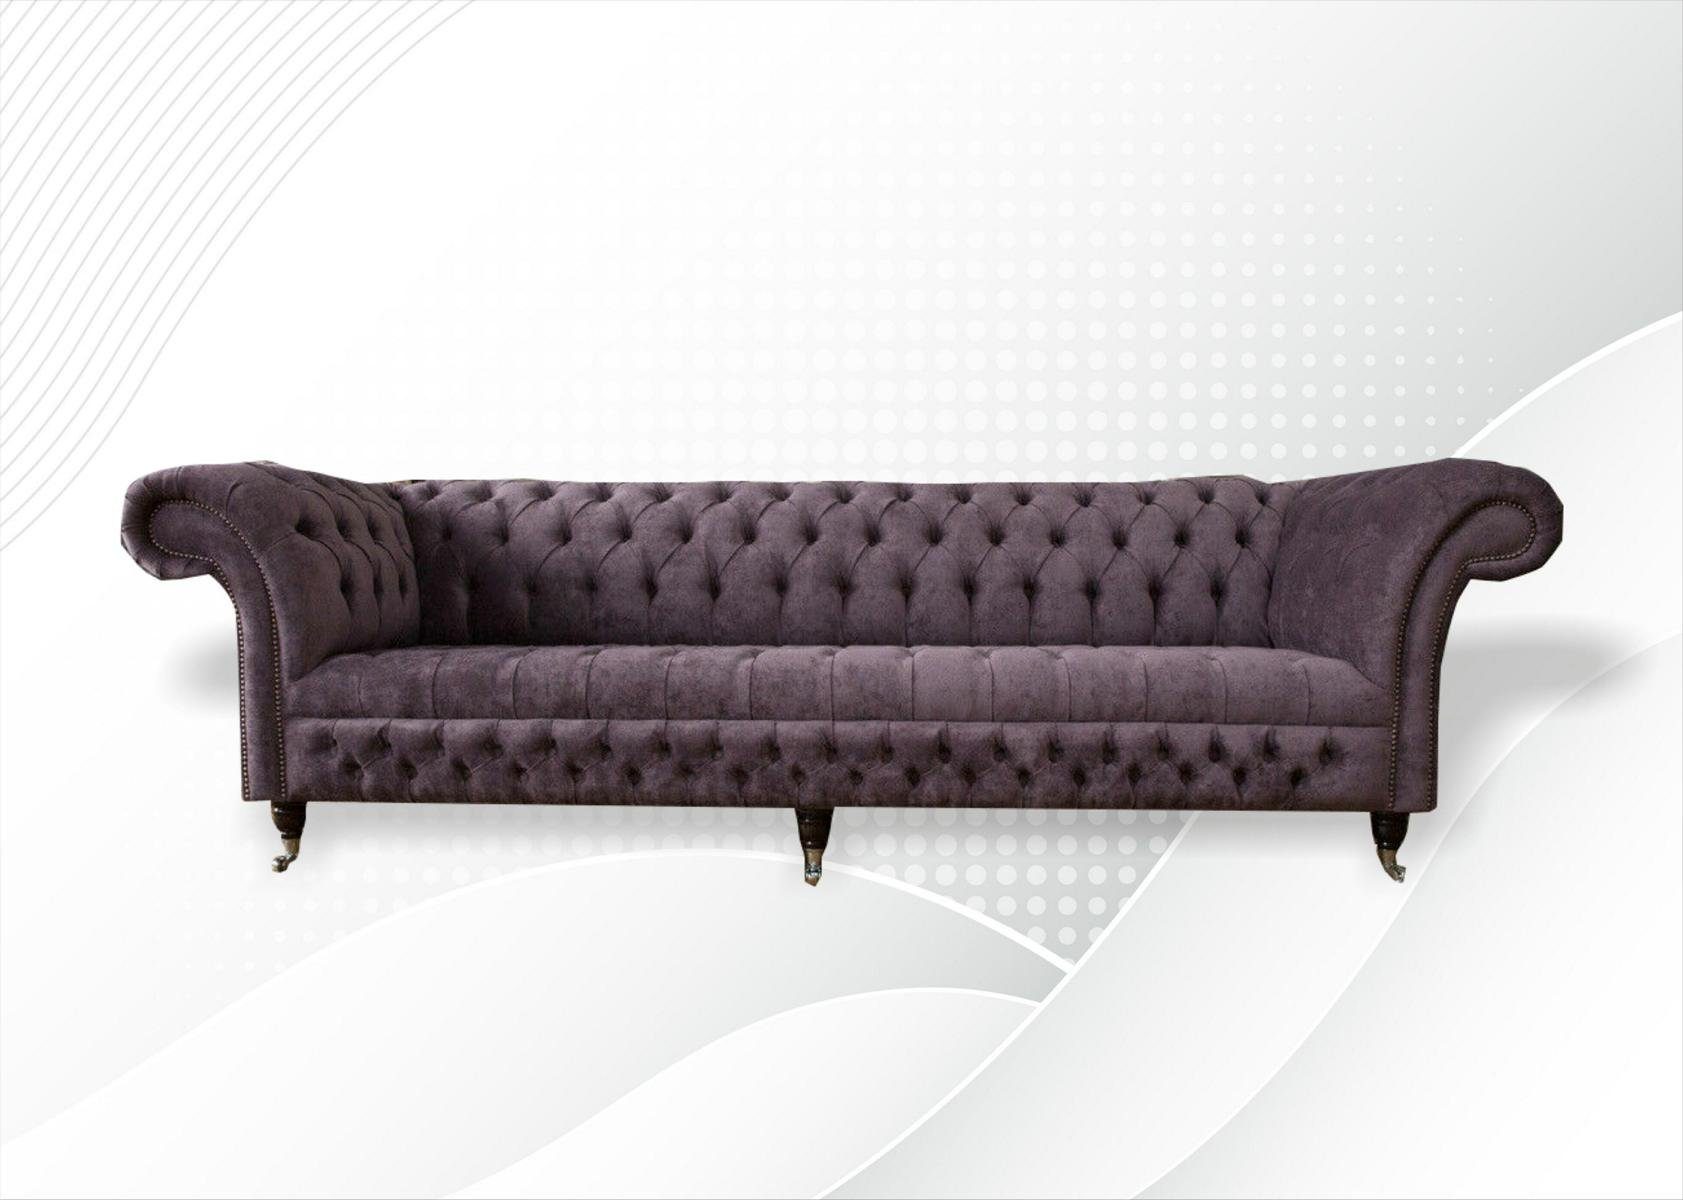 JVmoebel Sofa xxl Sofas Couch Sofa Big Chesterfield 4 Europe Polster Leder, Made 265cm in Sitzer